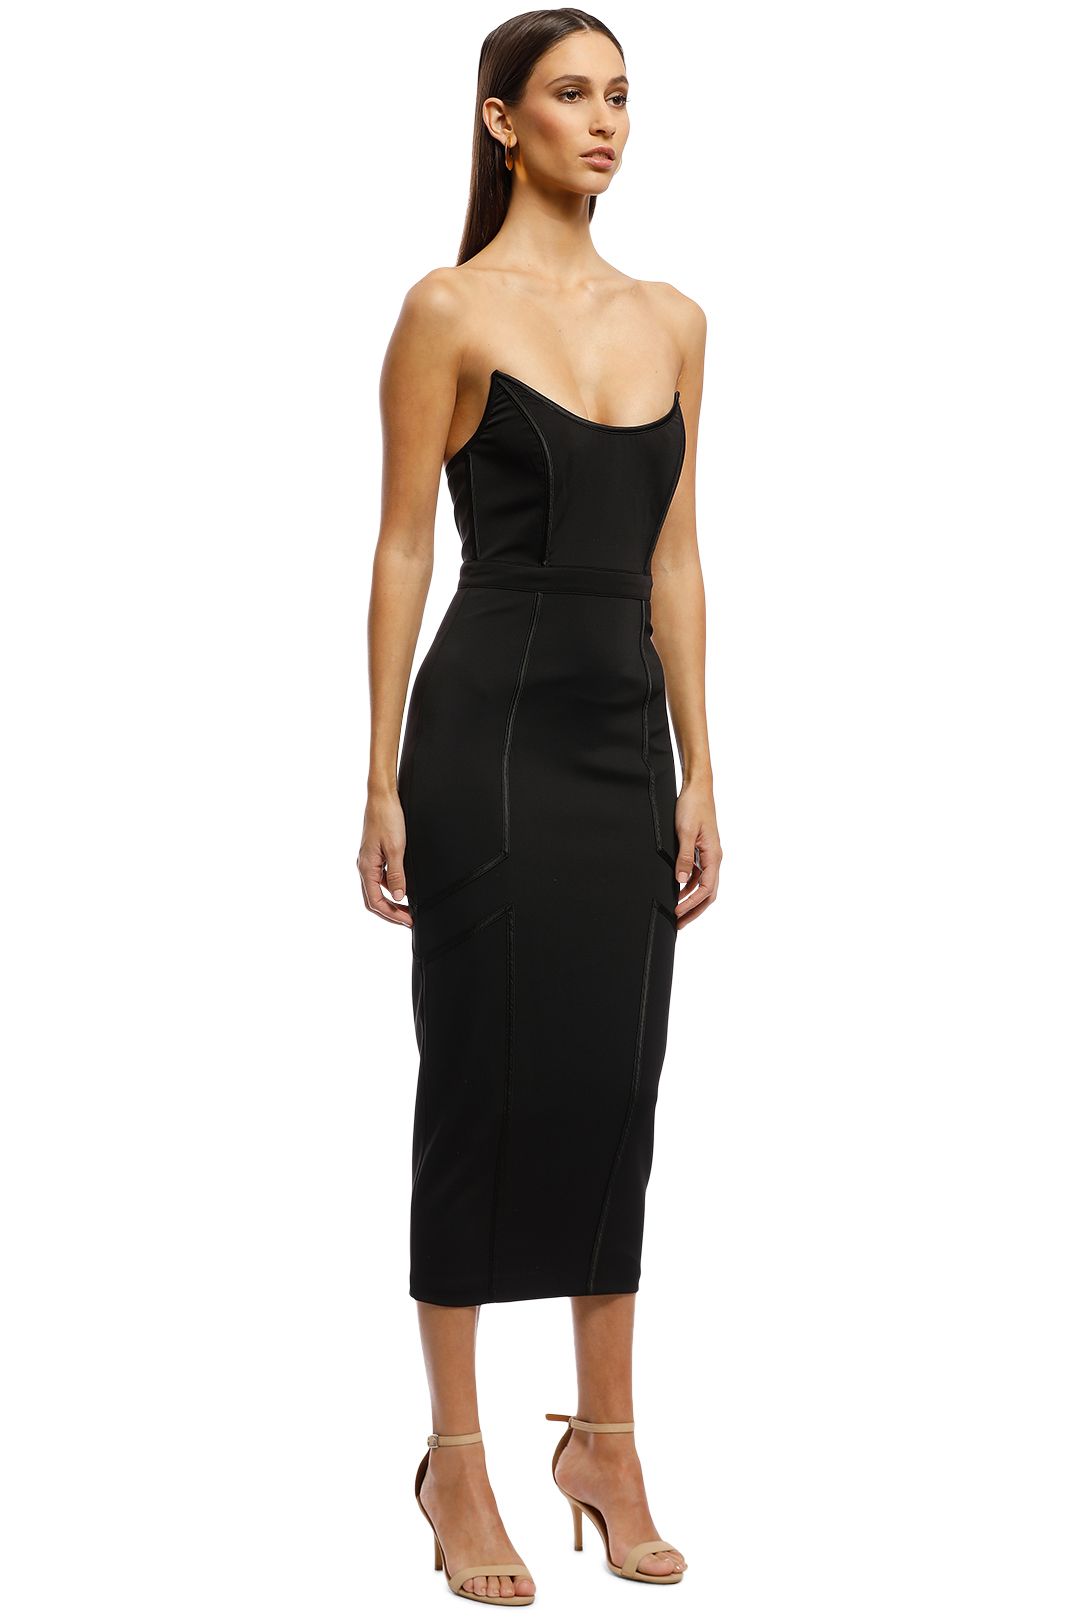 Lea Dress in Black by Misha Collection for Rent